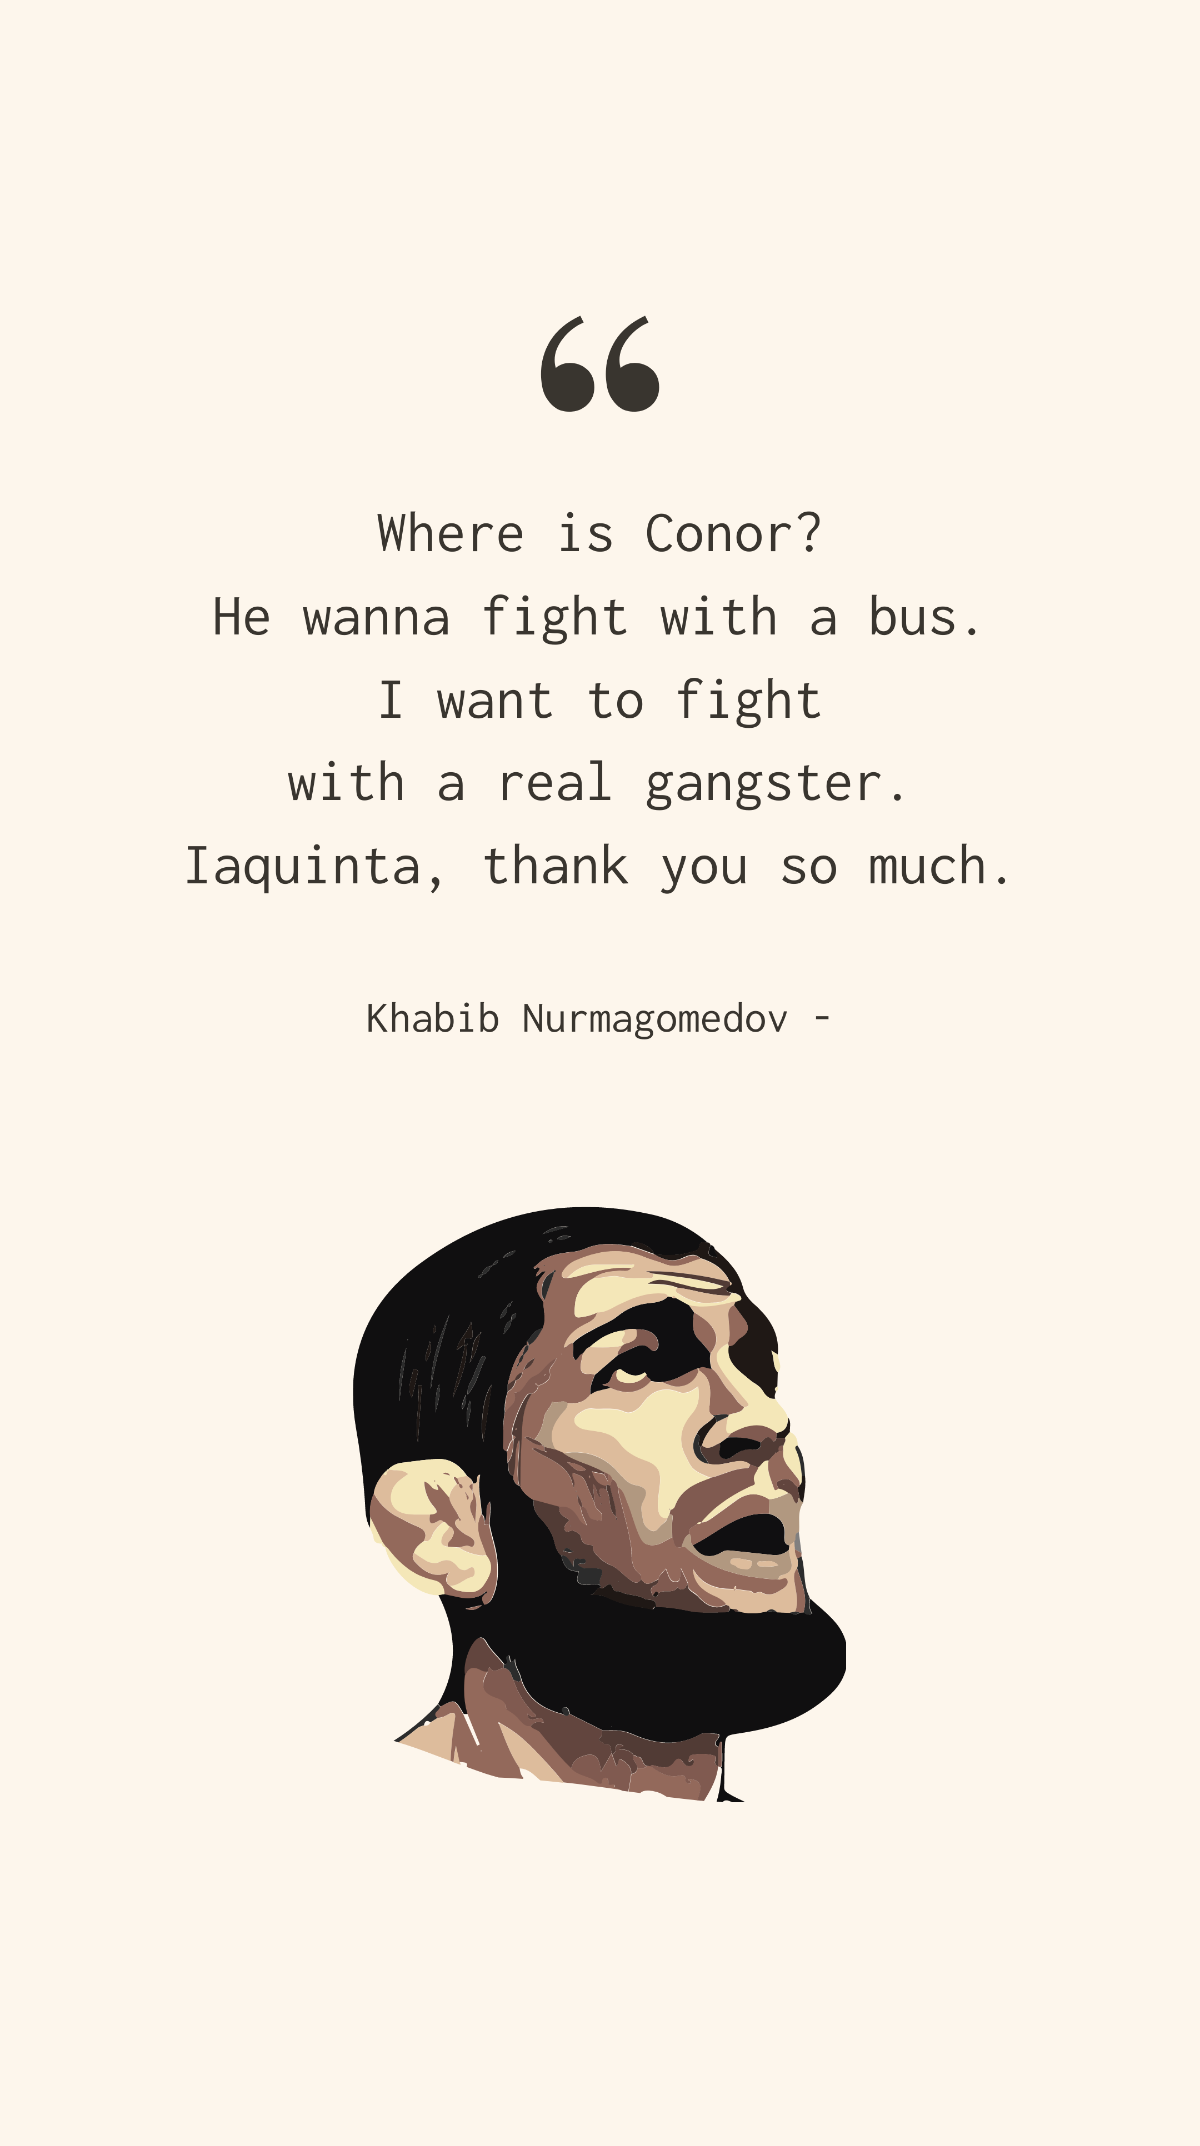 Free Khabib Nurmagomedov - Where is Conor? He wanna fight with a bus. I want to fight with a real gangster. Iaquinta, thank you so much. Template